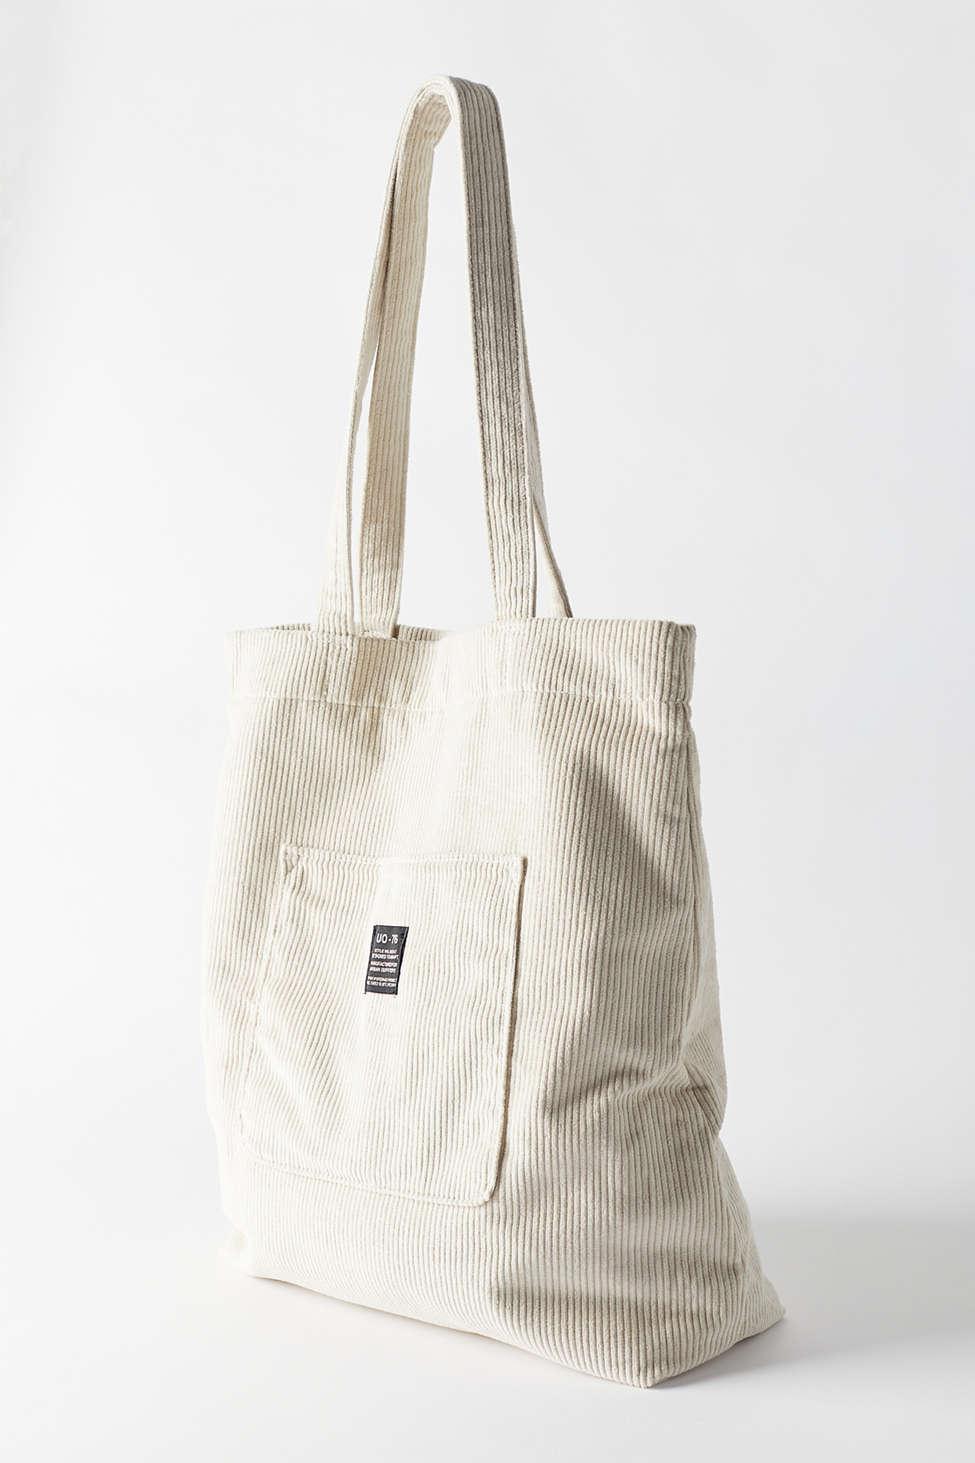 Urban Outfitters Uo Green Corduroy Tote Bag for Men